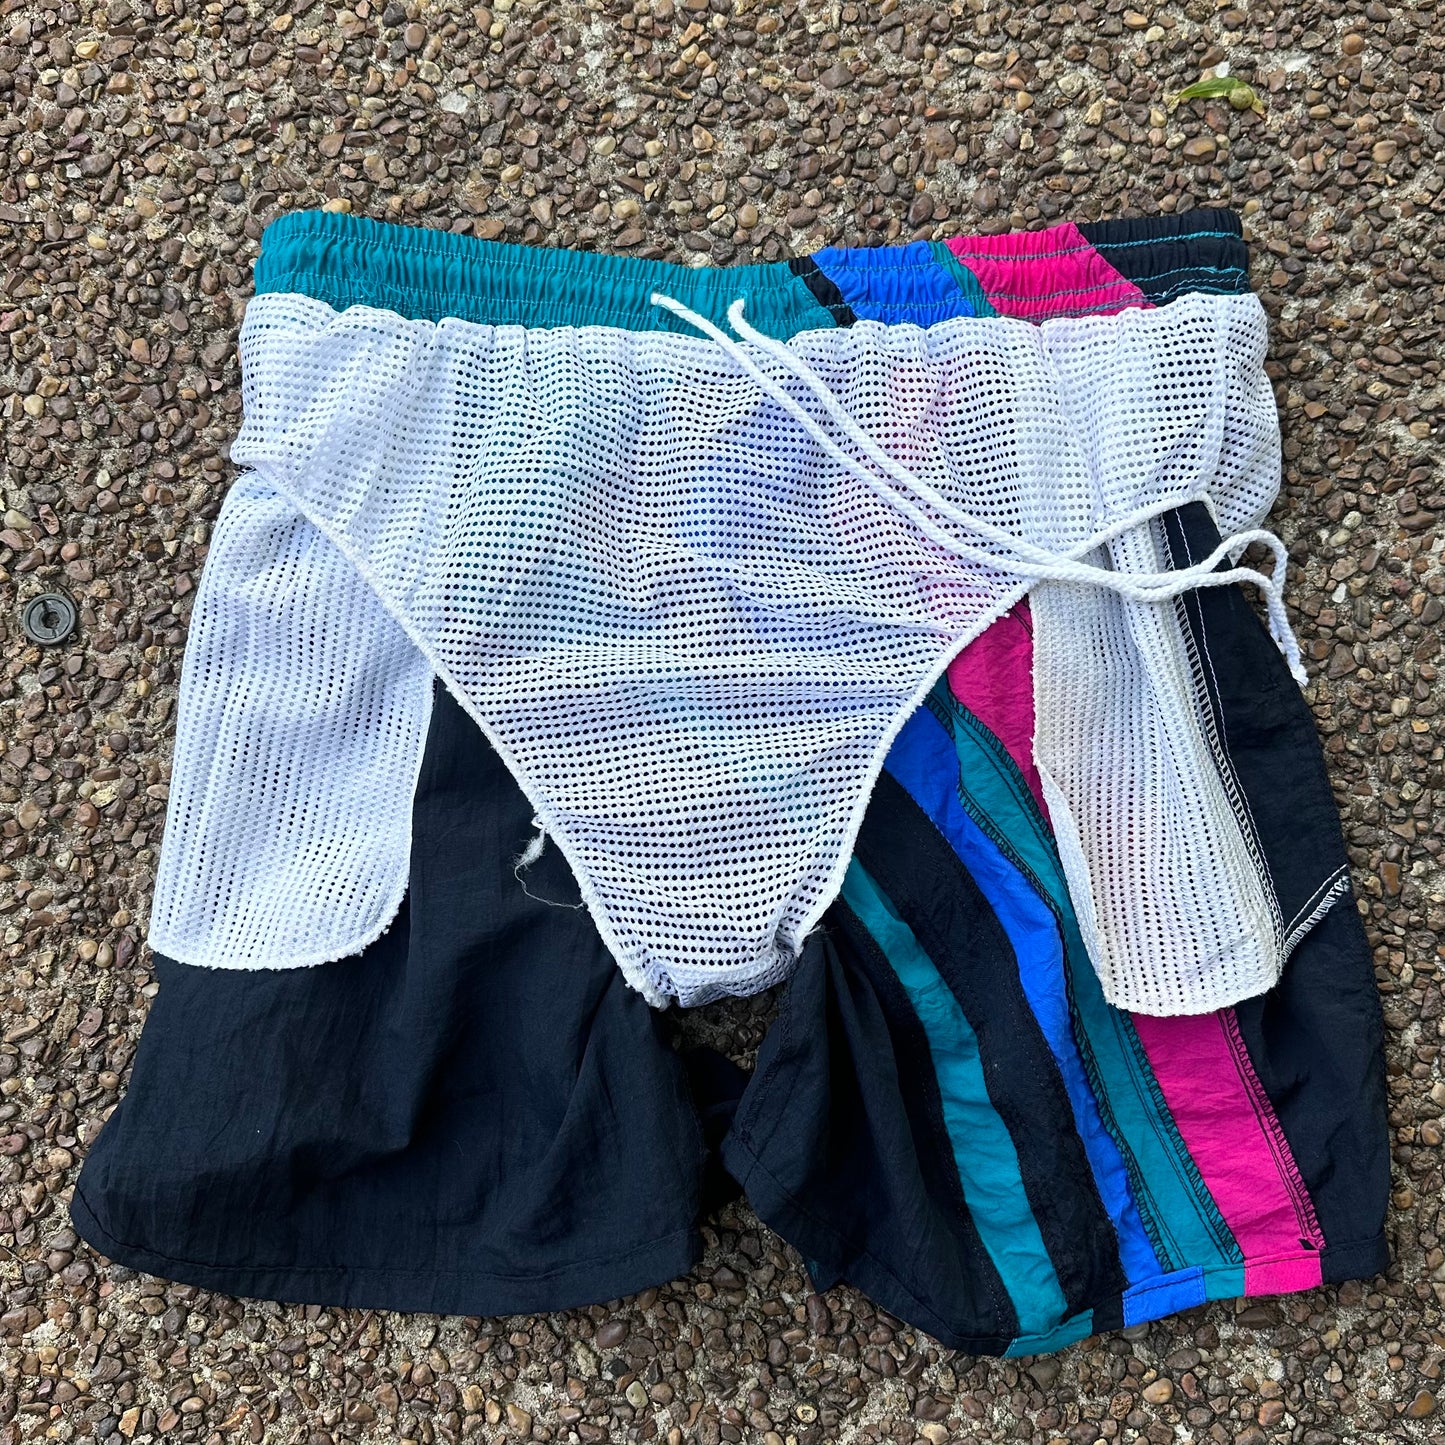 1990s Men’s Swim Trunks, Color Block, Campus Size Large, Deadstock with Tags